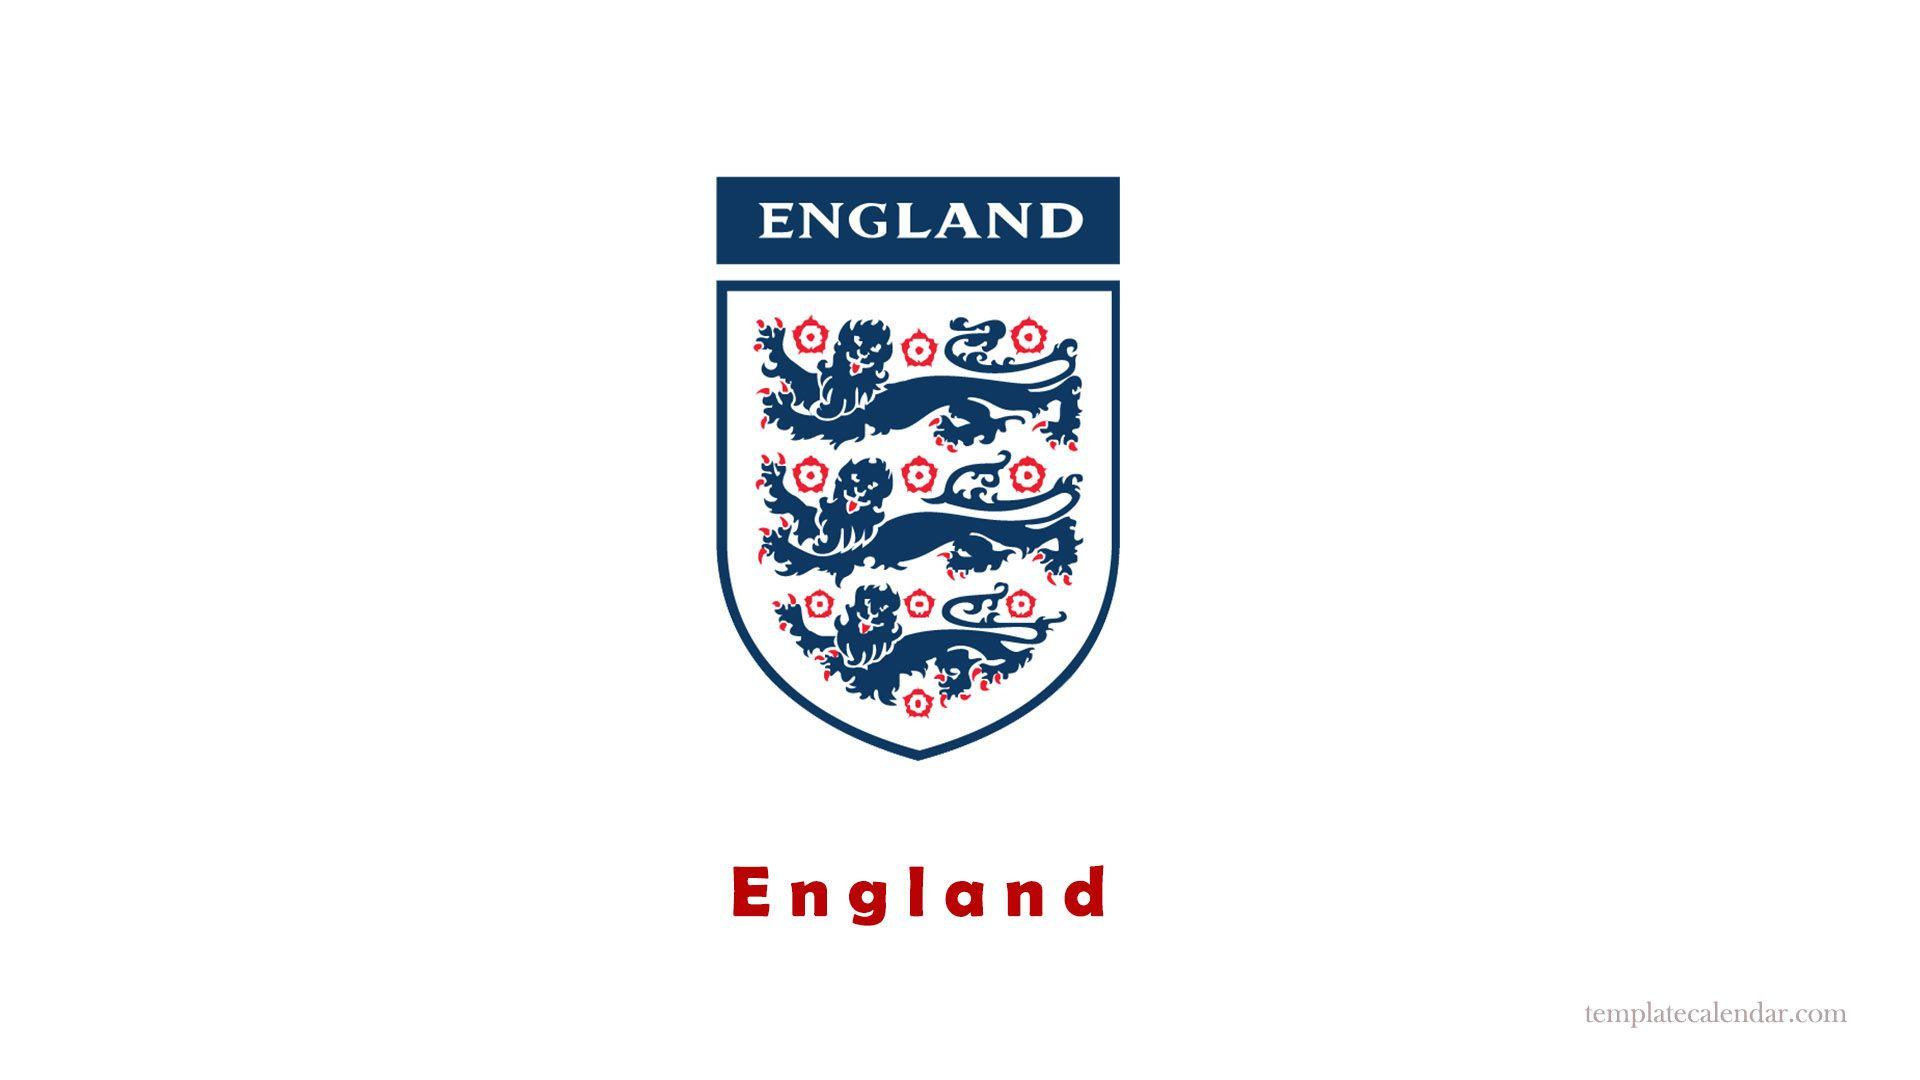 England National Football Team Wallpaper, Nice Picture